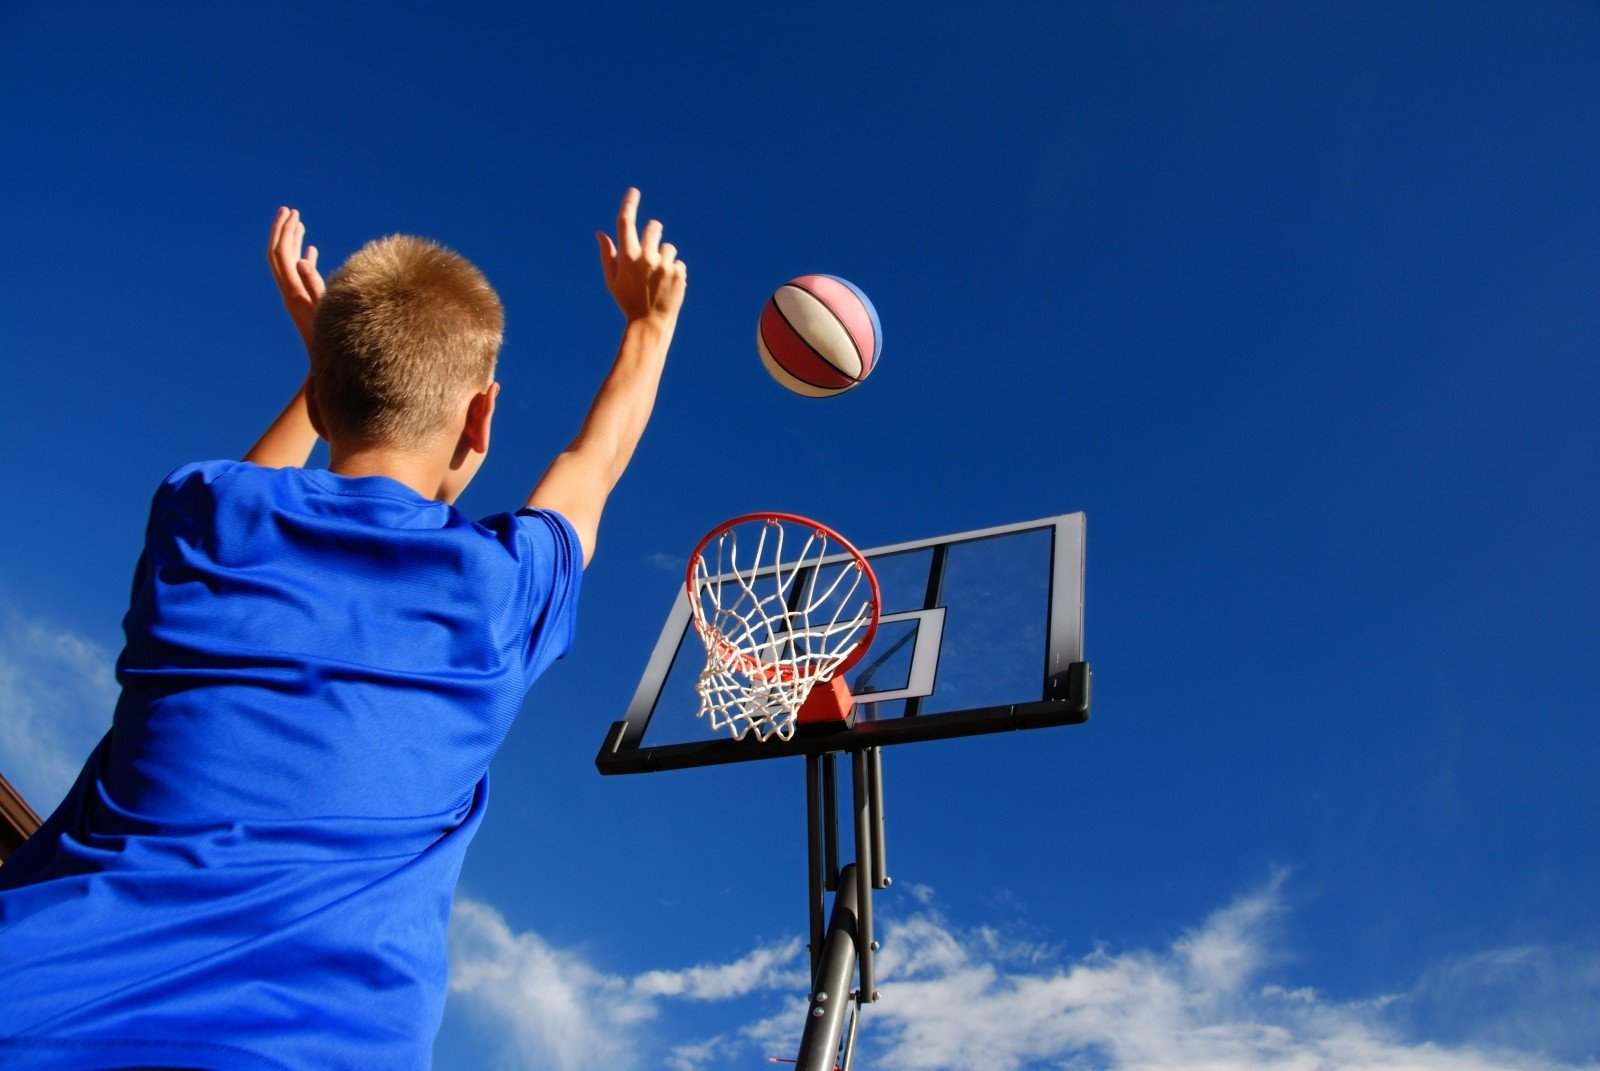 Some Important Health Benefits Of Playing Basketball